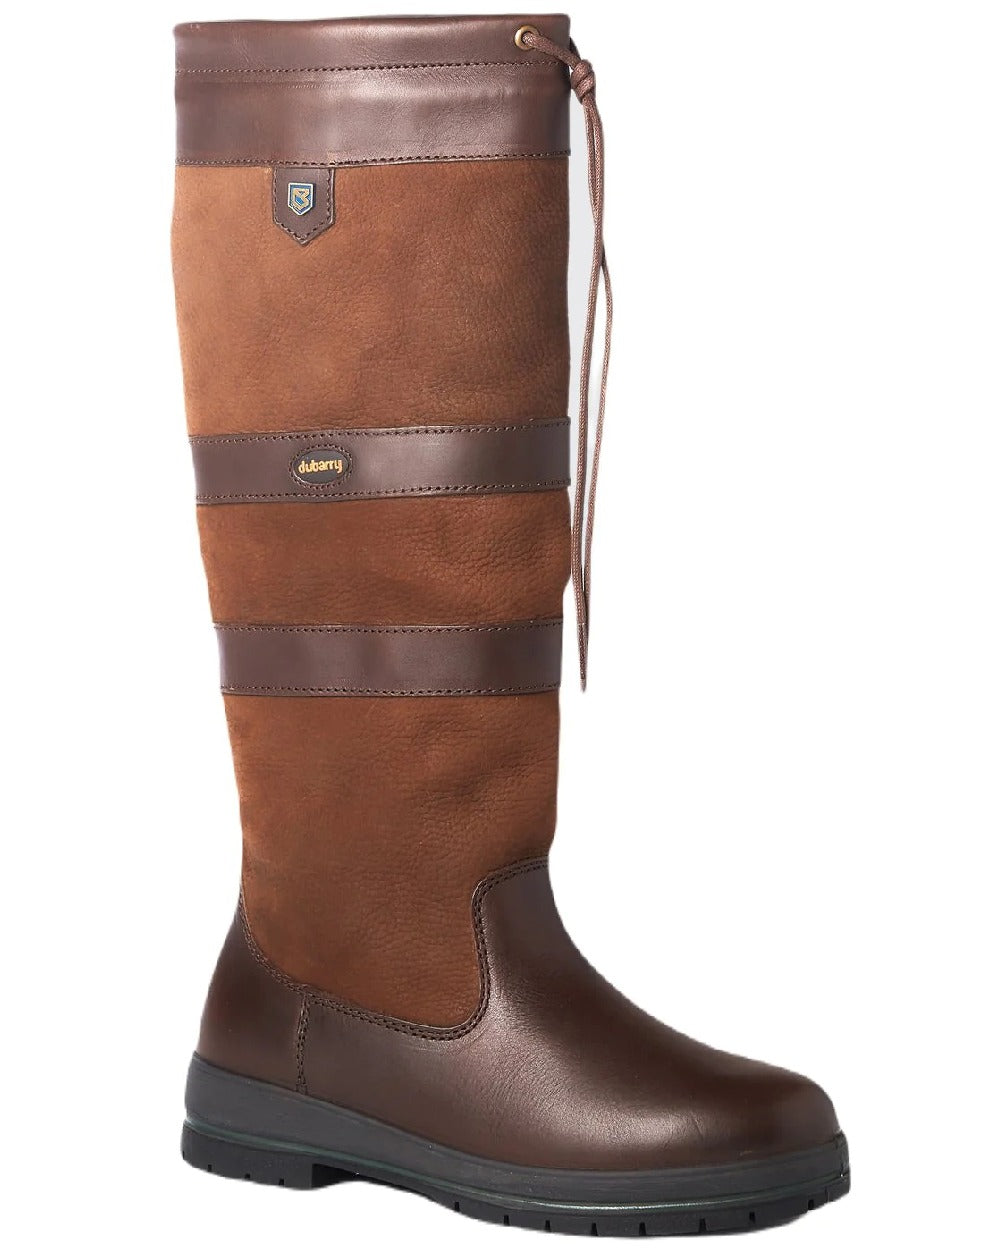 Dubarry Galway Country Boots in Walnut 